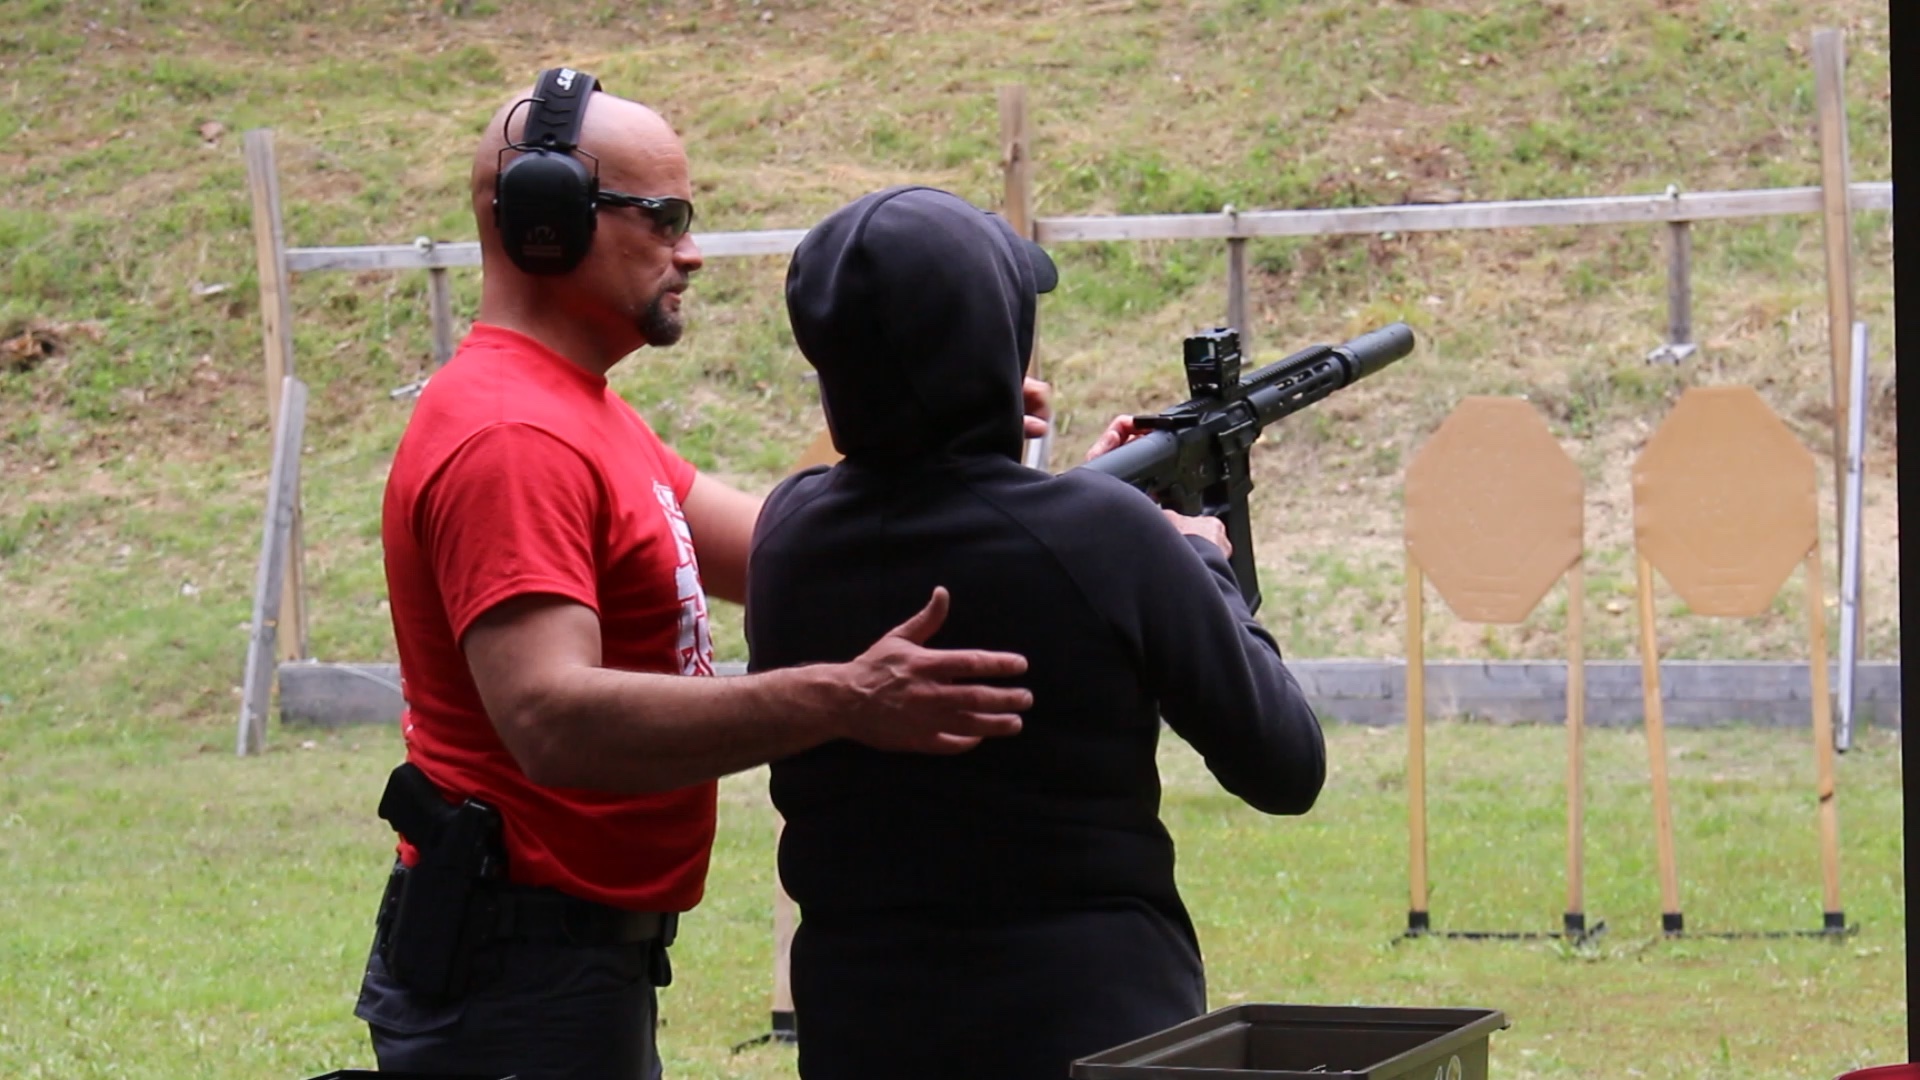 gifts for gun owners - firearms education